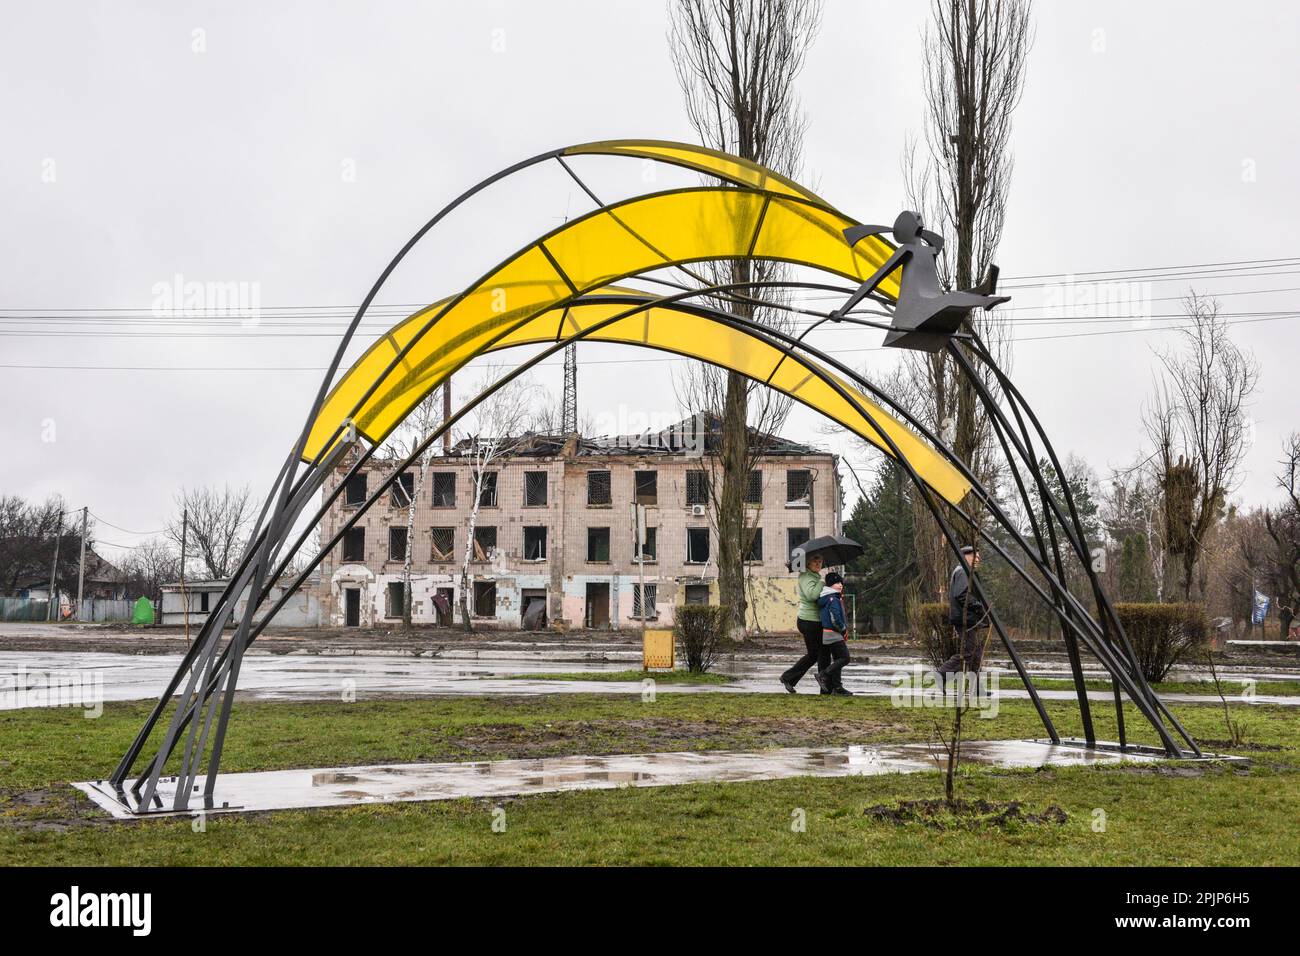 The sculpture 'Girl under the sun' is visible against the background of a destroyed house. The sculpture 'Girl under the sun' was opened in Borordyanka in honor of the anniversary of the de-occupation of Kyiv region. The four-meter sculpture represents the victory of life over destruction, and its arches will symbolize the resistance of seven districts of Kyiv region and the capital. This is how the symbolic date was celebrated - a year ago, the Armed Forces of Ukraine completely liberated the Kyiv region from the Russian invaders. 'The sculpture reflects the powerful contrast of life and dest Stock Photo